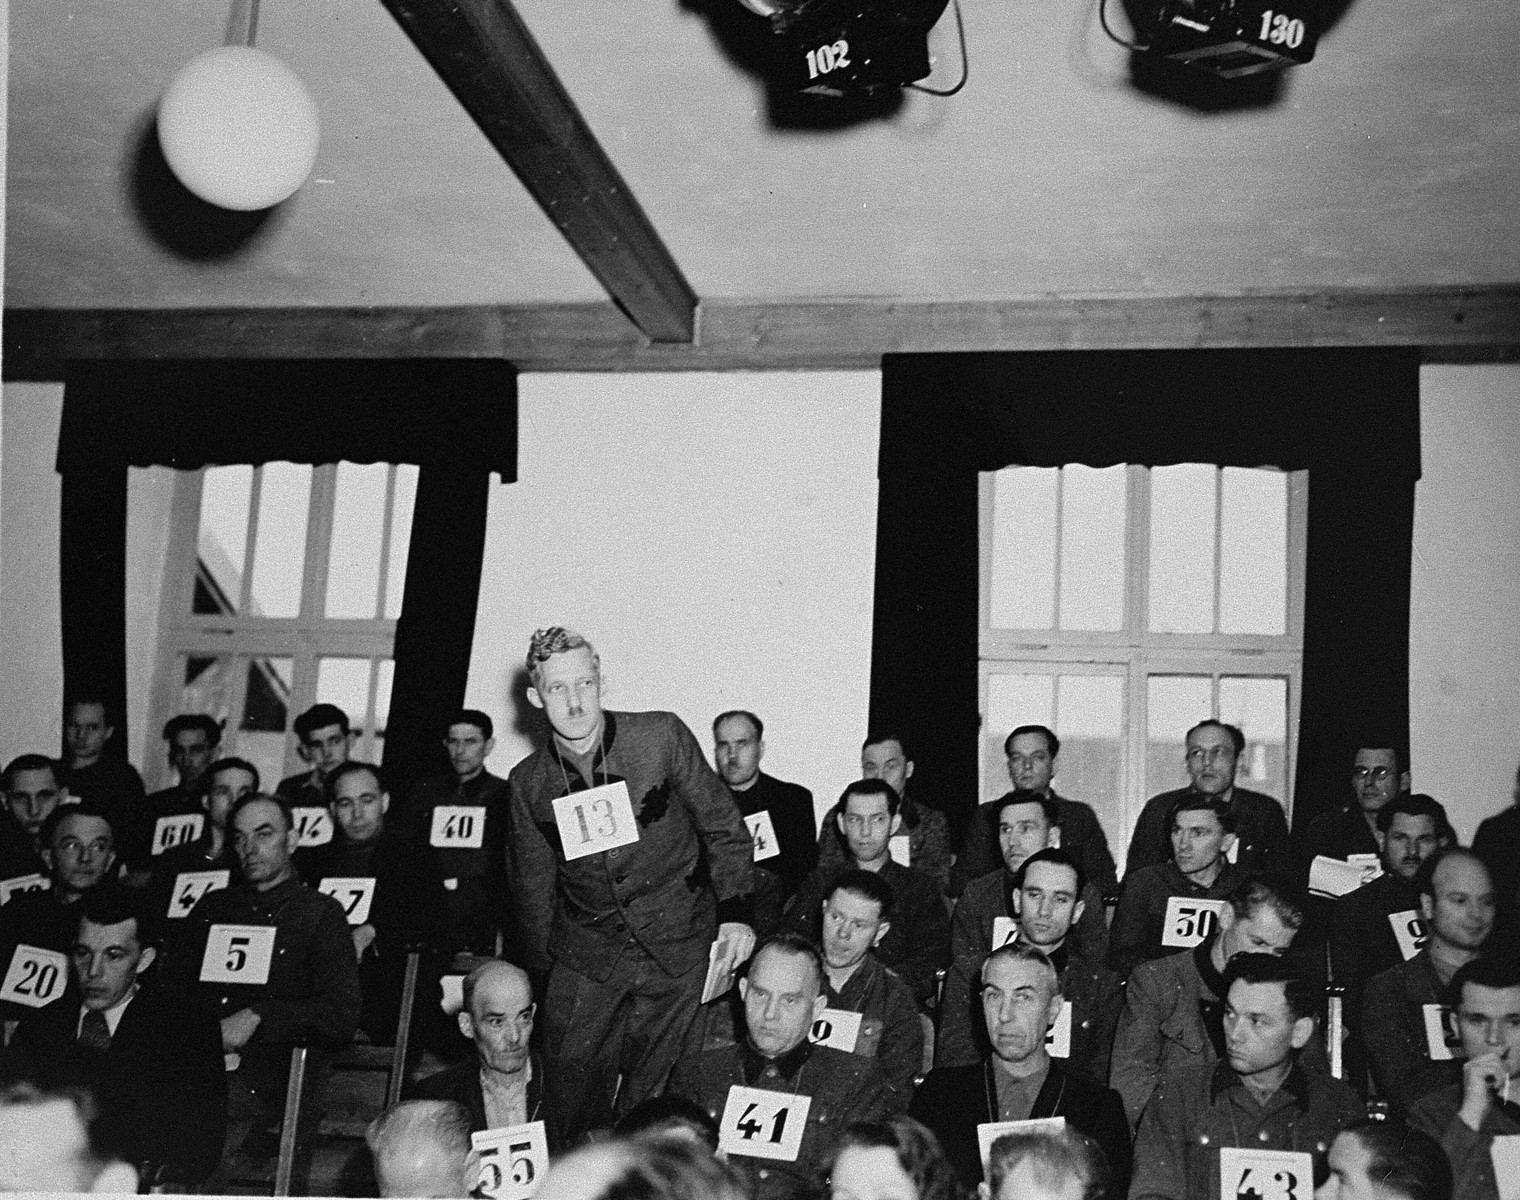 August Eigruber, former Gauleiter of Upper Austria and a defendant at the trial of 61 former camp personnel and prisoners from Mauthausen, stands up at his place in the defendants' dock.  

Eigruber was convicted and sentenced to death on May 13, 1946.